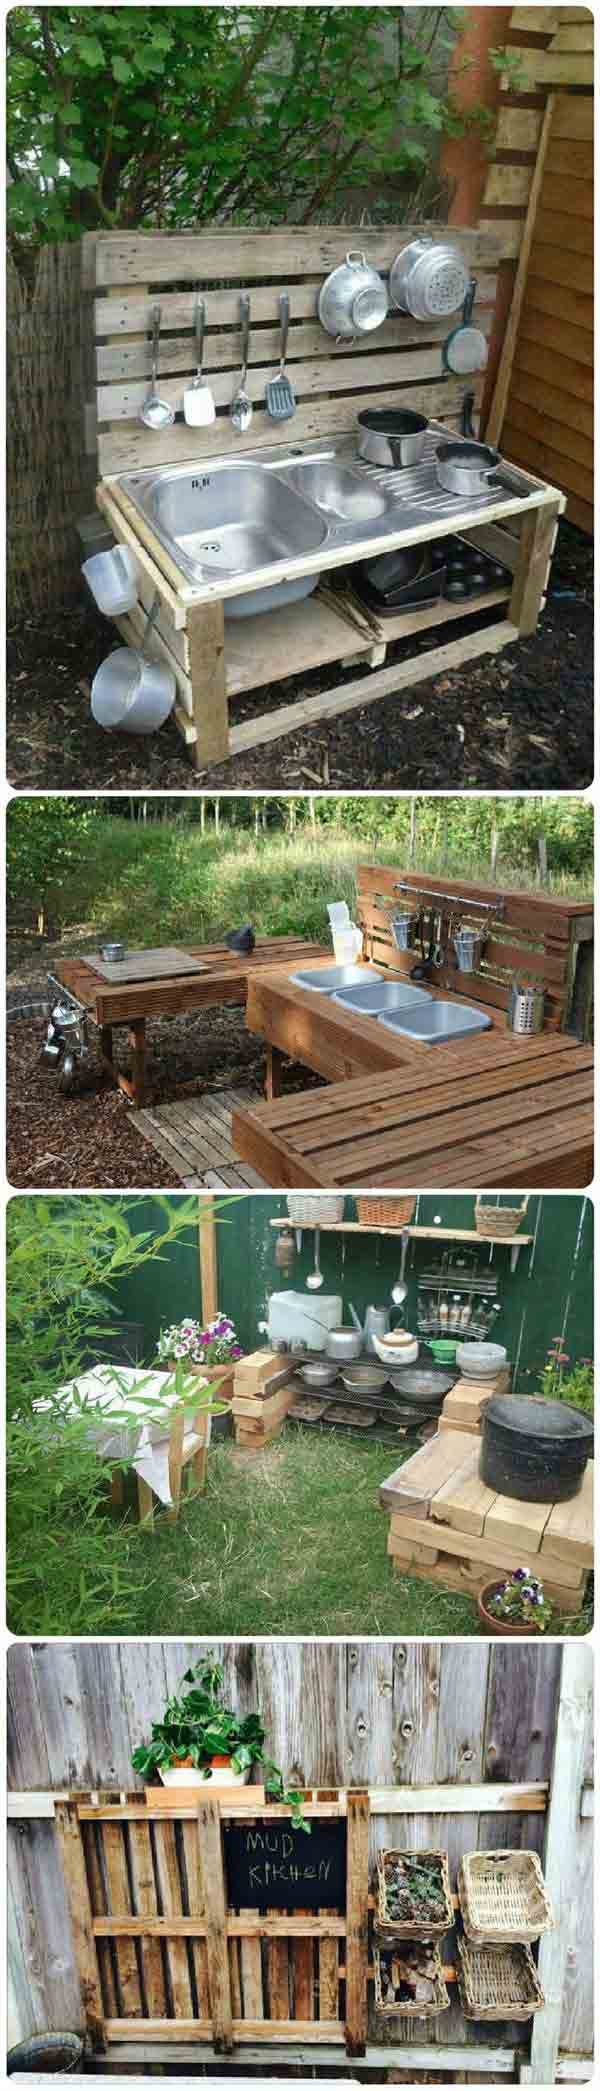 25 Playful DIY Backyard Projects To Surprise Your Kids - Amazing DIY ...